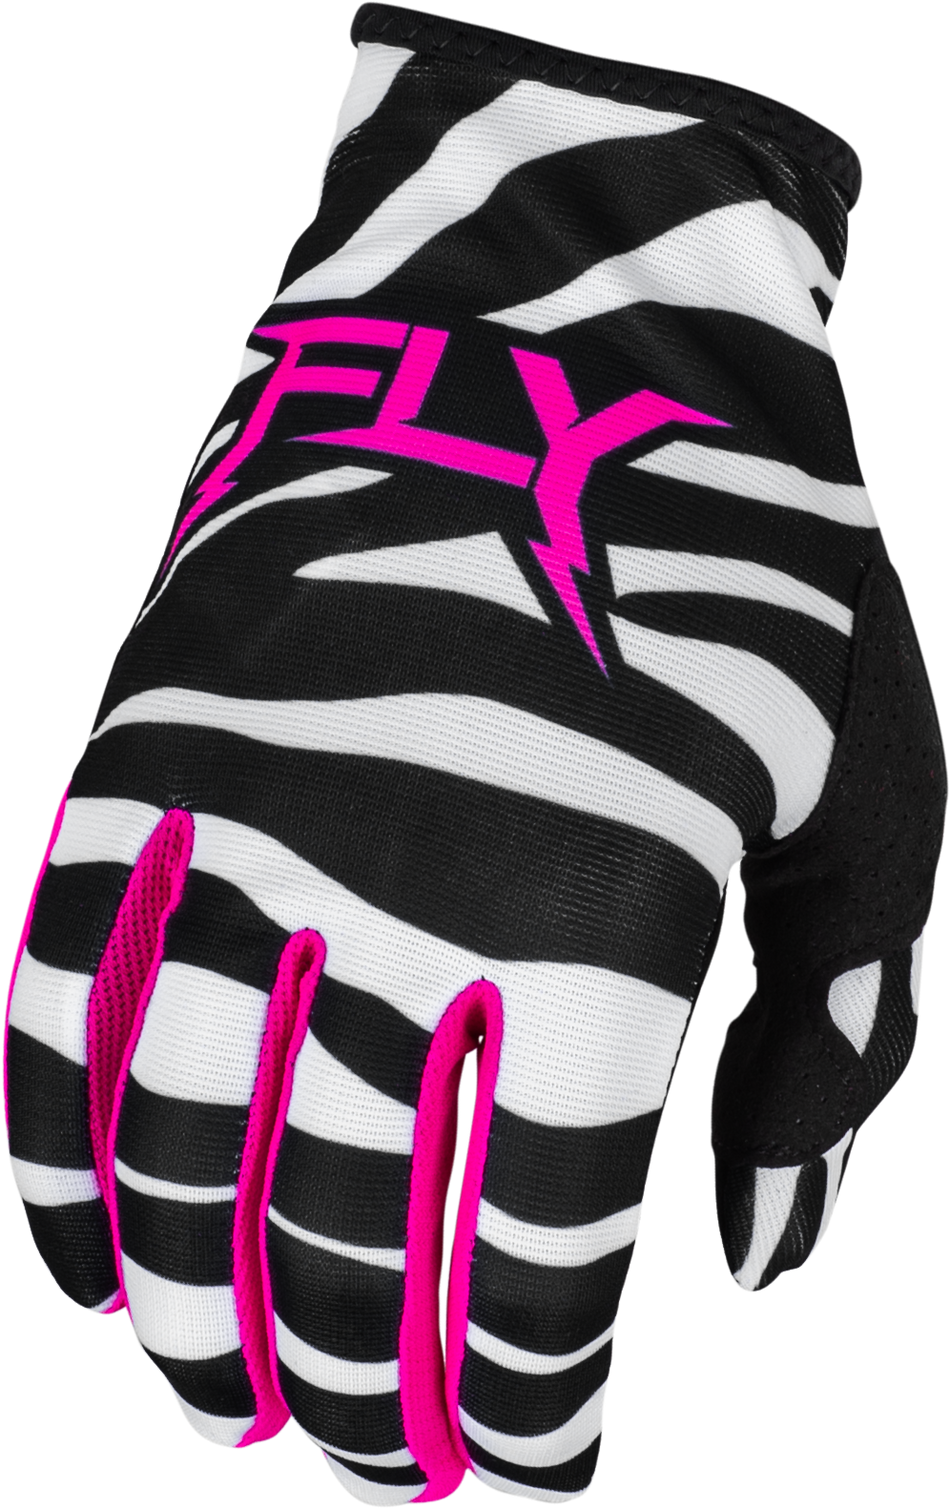 FLY RACING Lite Uncaged Gloves Black/White/Neon Pink Xl 377-741X